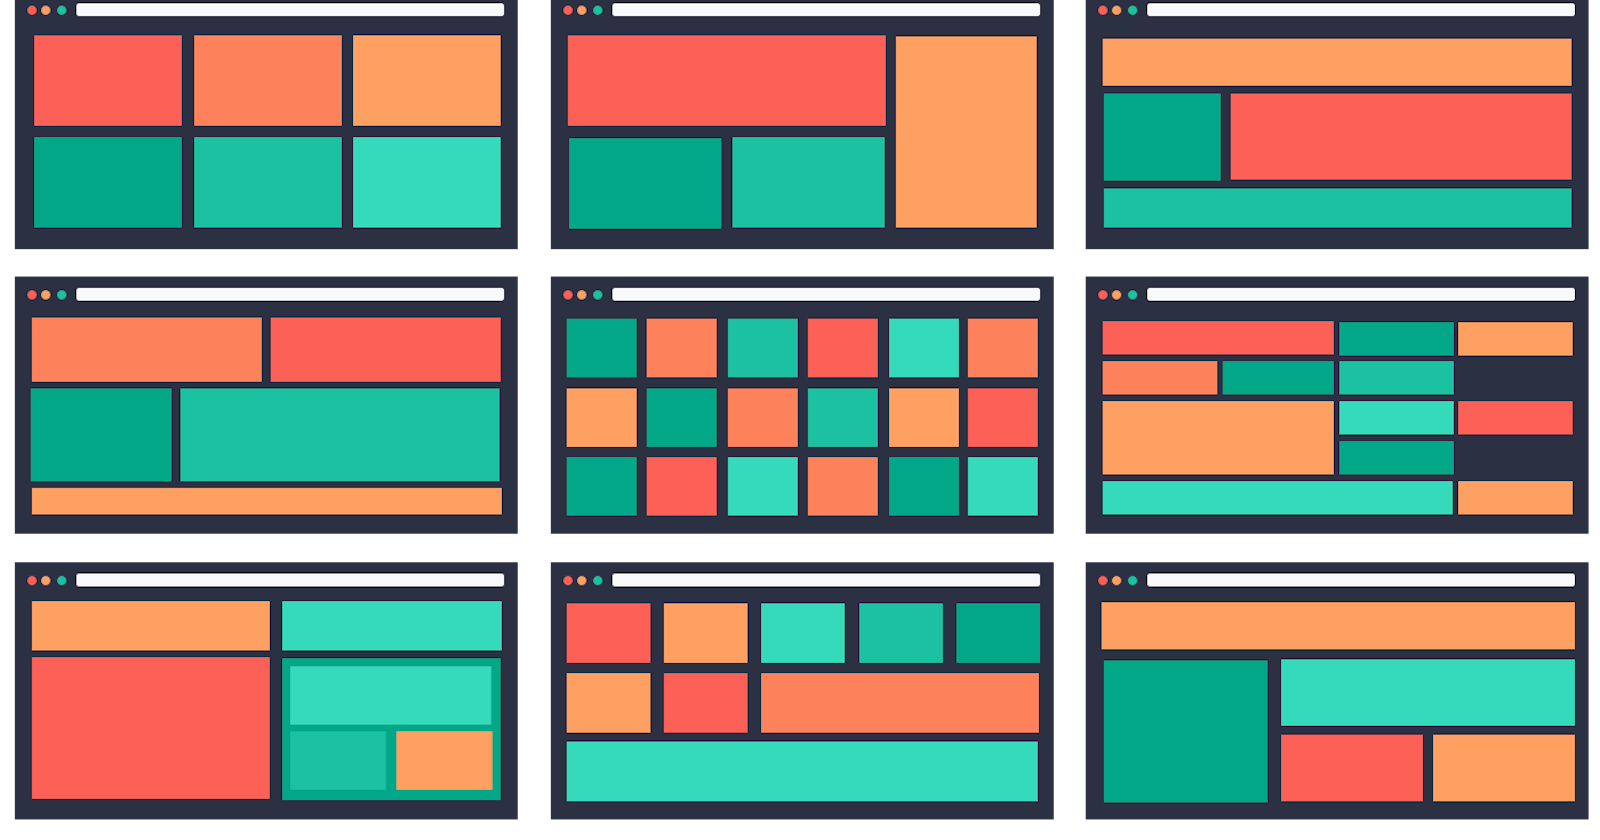 Grid - The styles of a good application